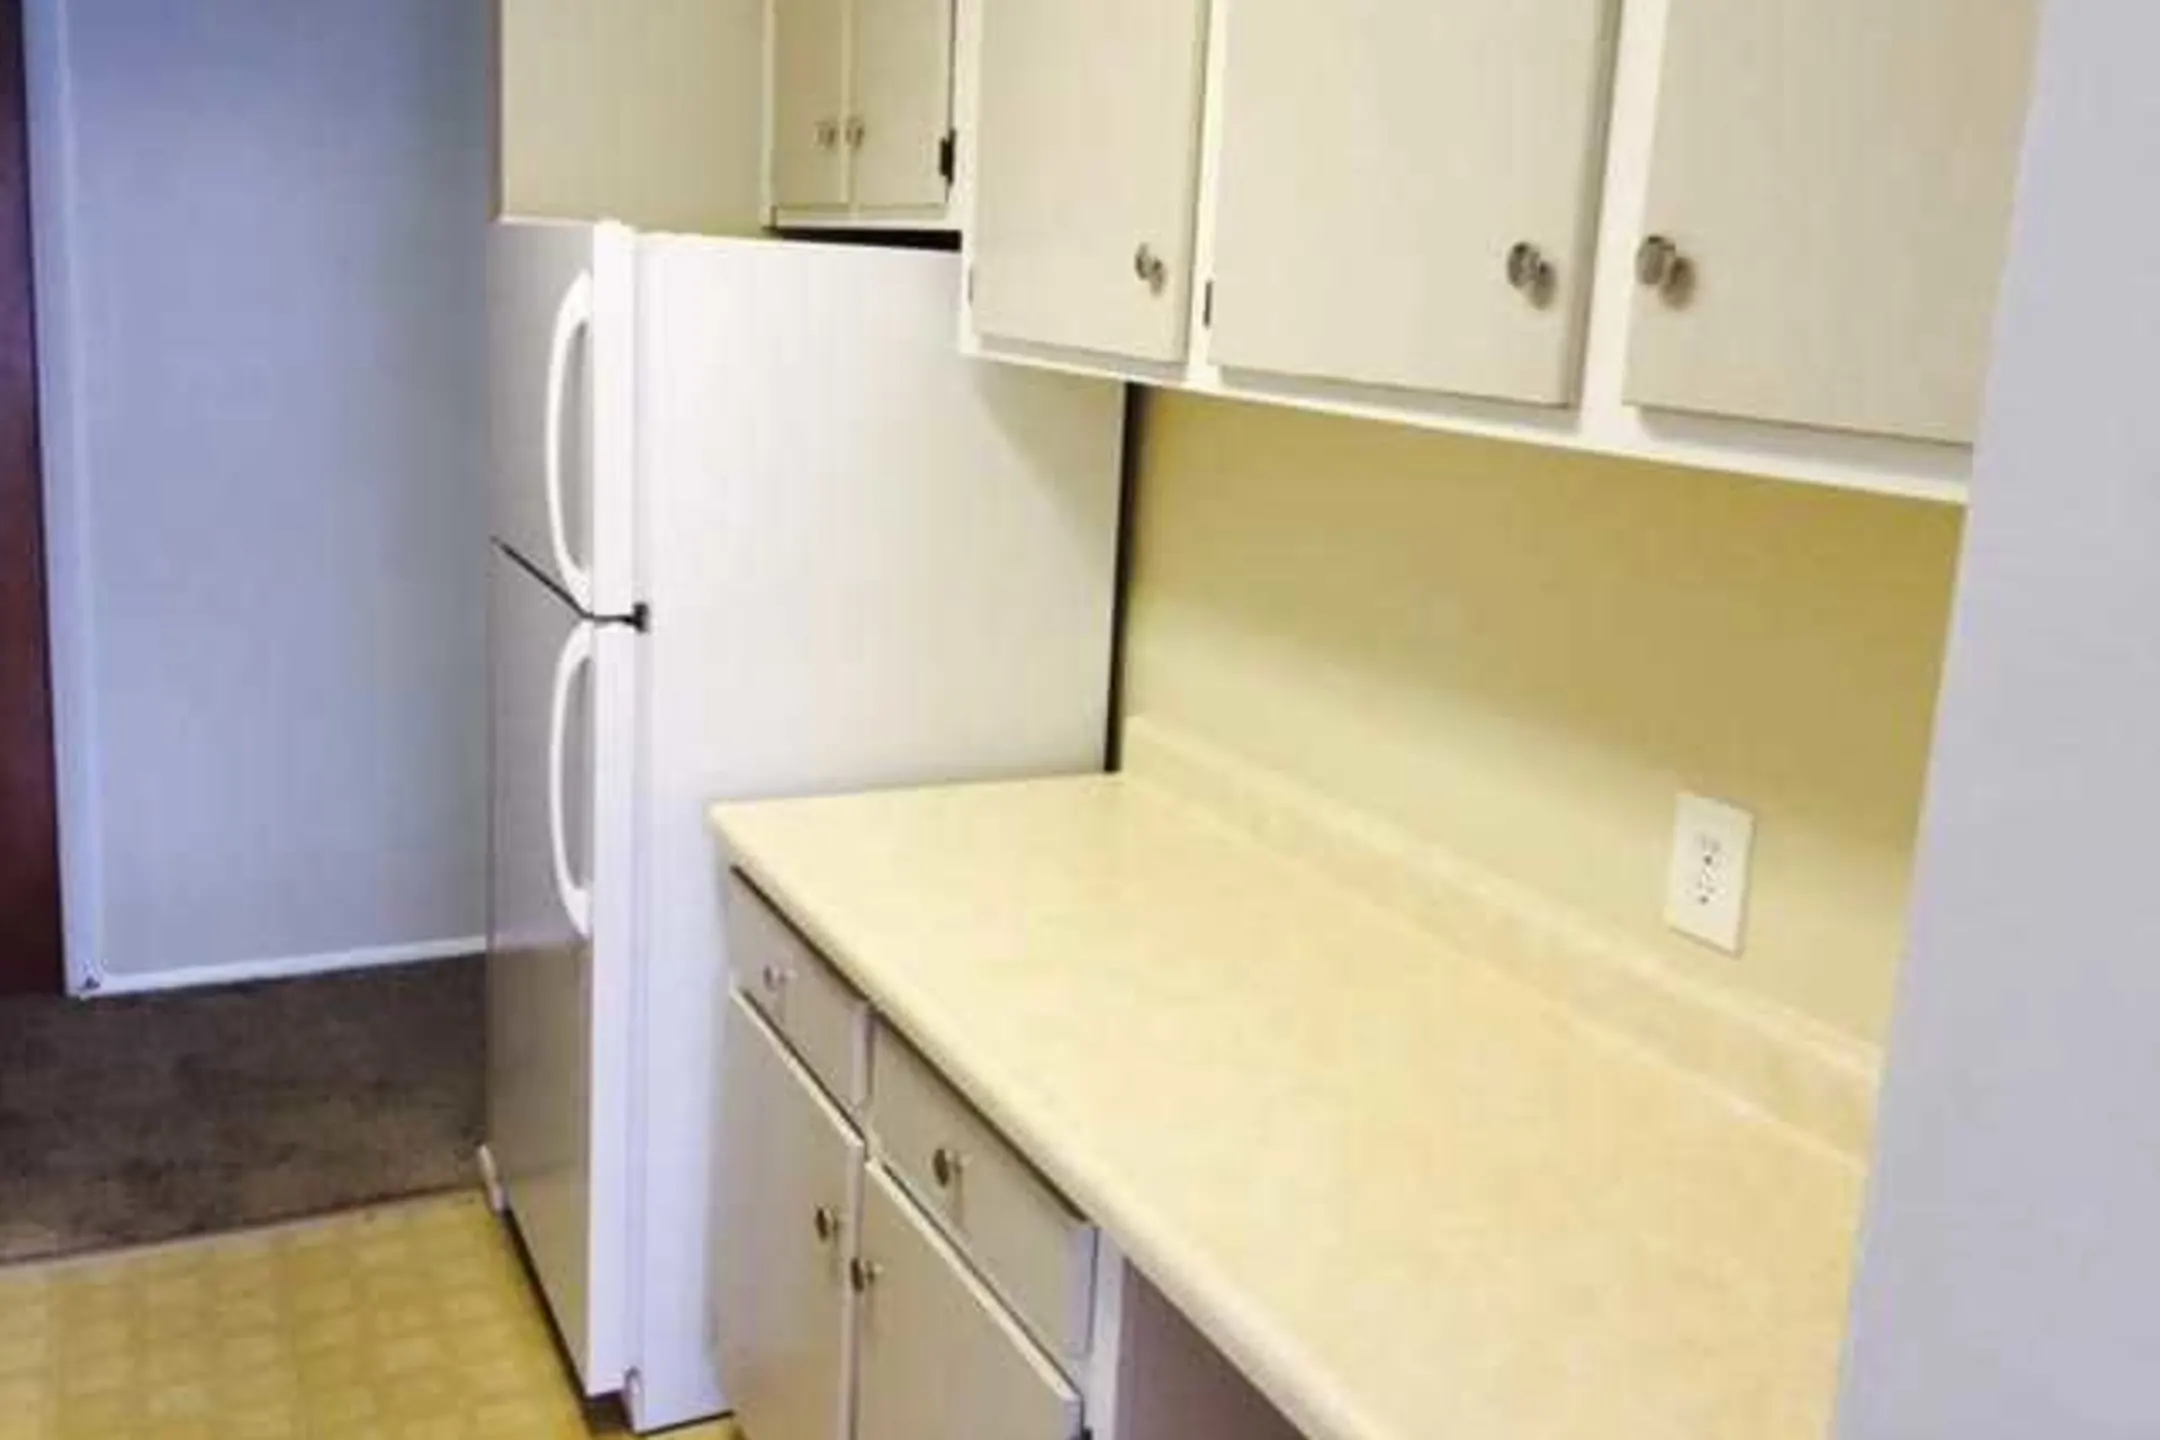 Kitchen - Monticello Apartments & Townhomes - Youngstown, OH